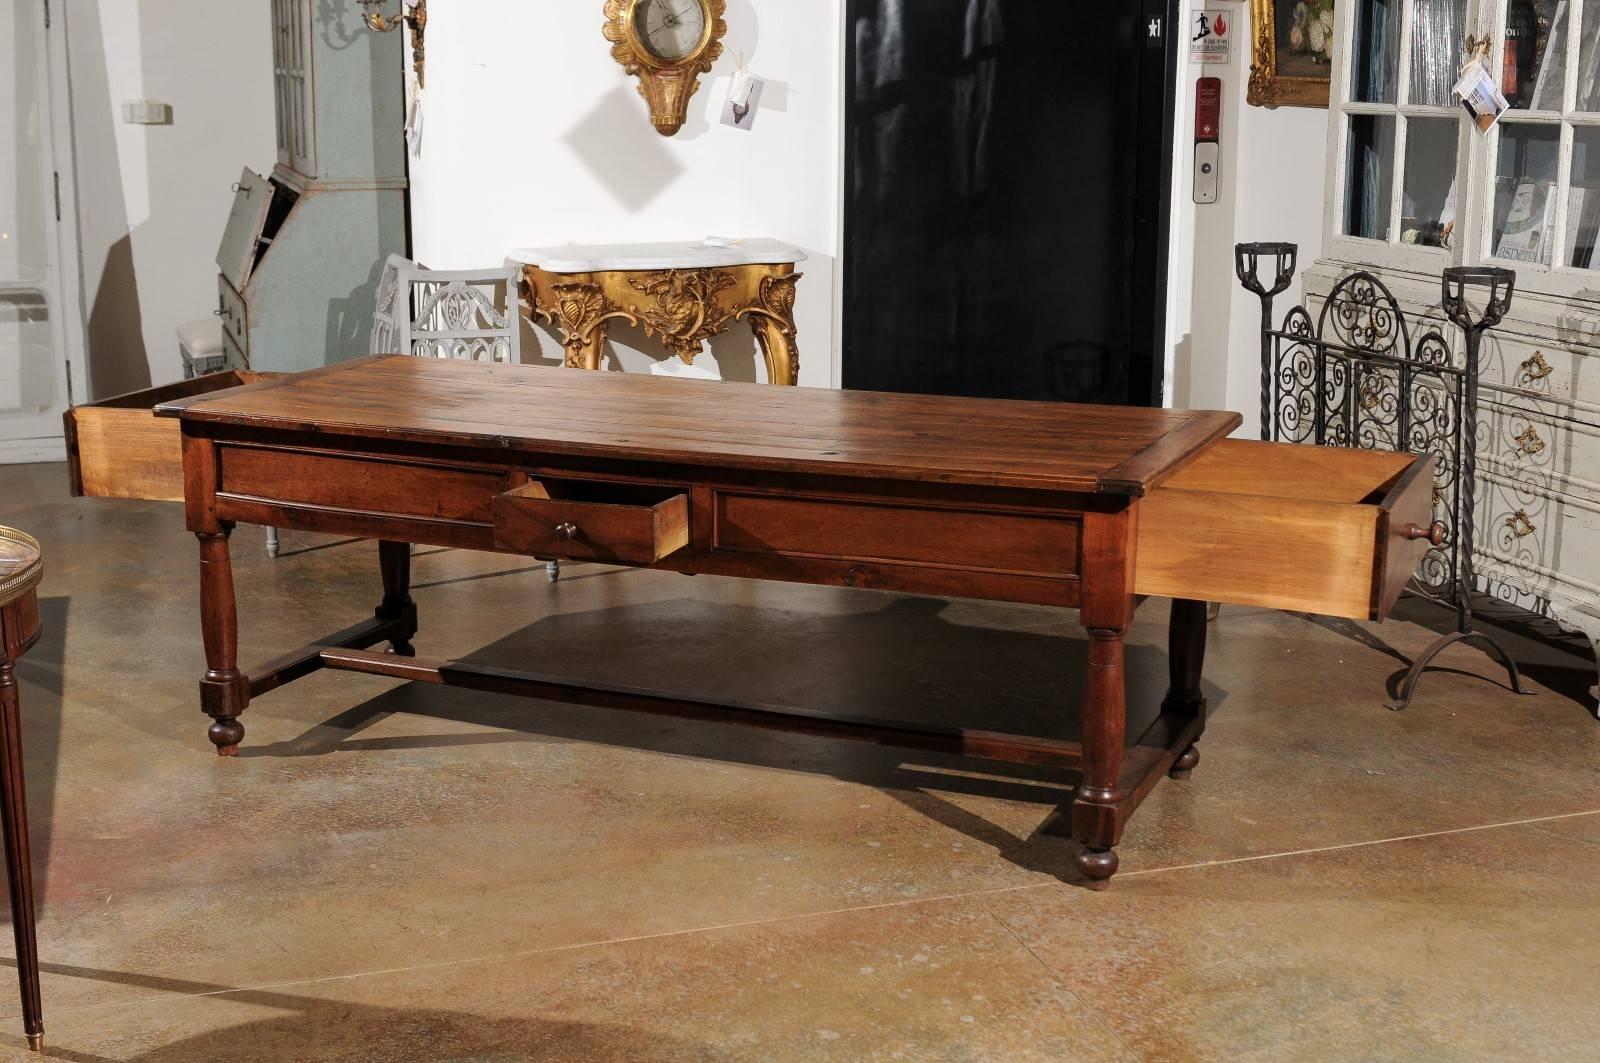 Late 18th Century French Walnut and Acacia Wood Sofa Table with Turned Legs For Sale 1